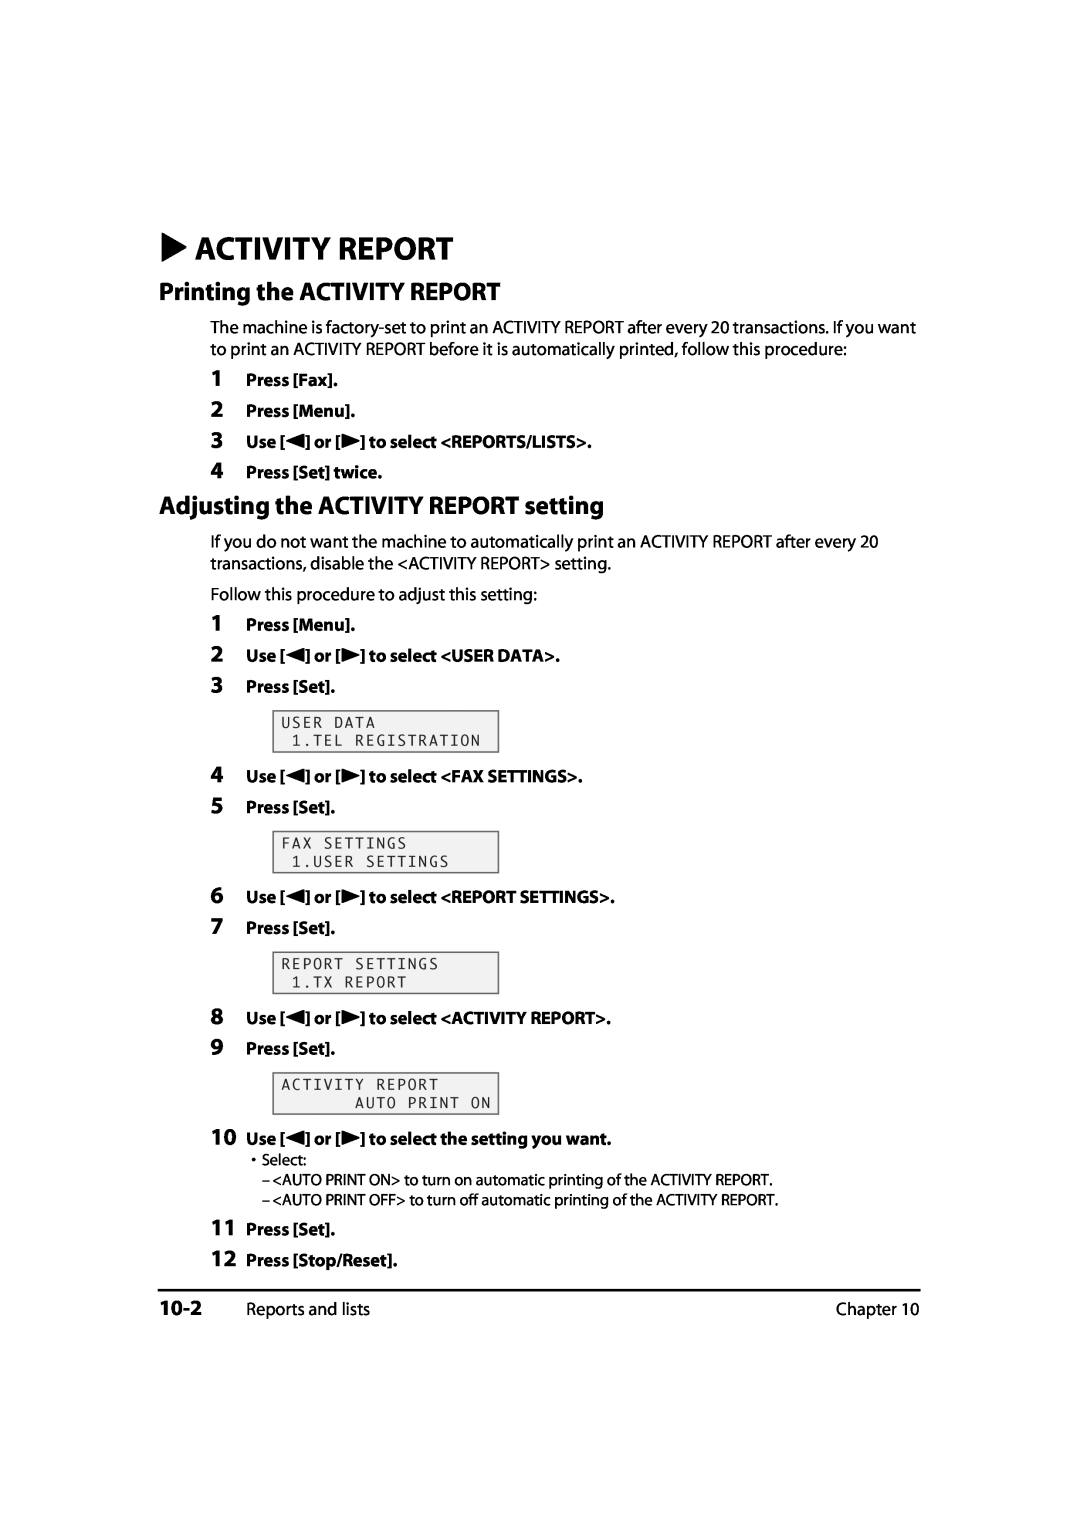 Canon MP700 Activity Report, Printing the ACTIVITY REPORT, Adjusting the ACTIVITY REPORT setting, 10-2, Press Set twice 